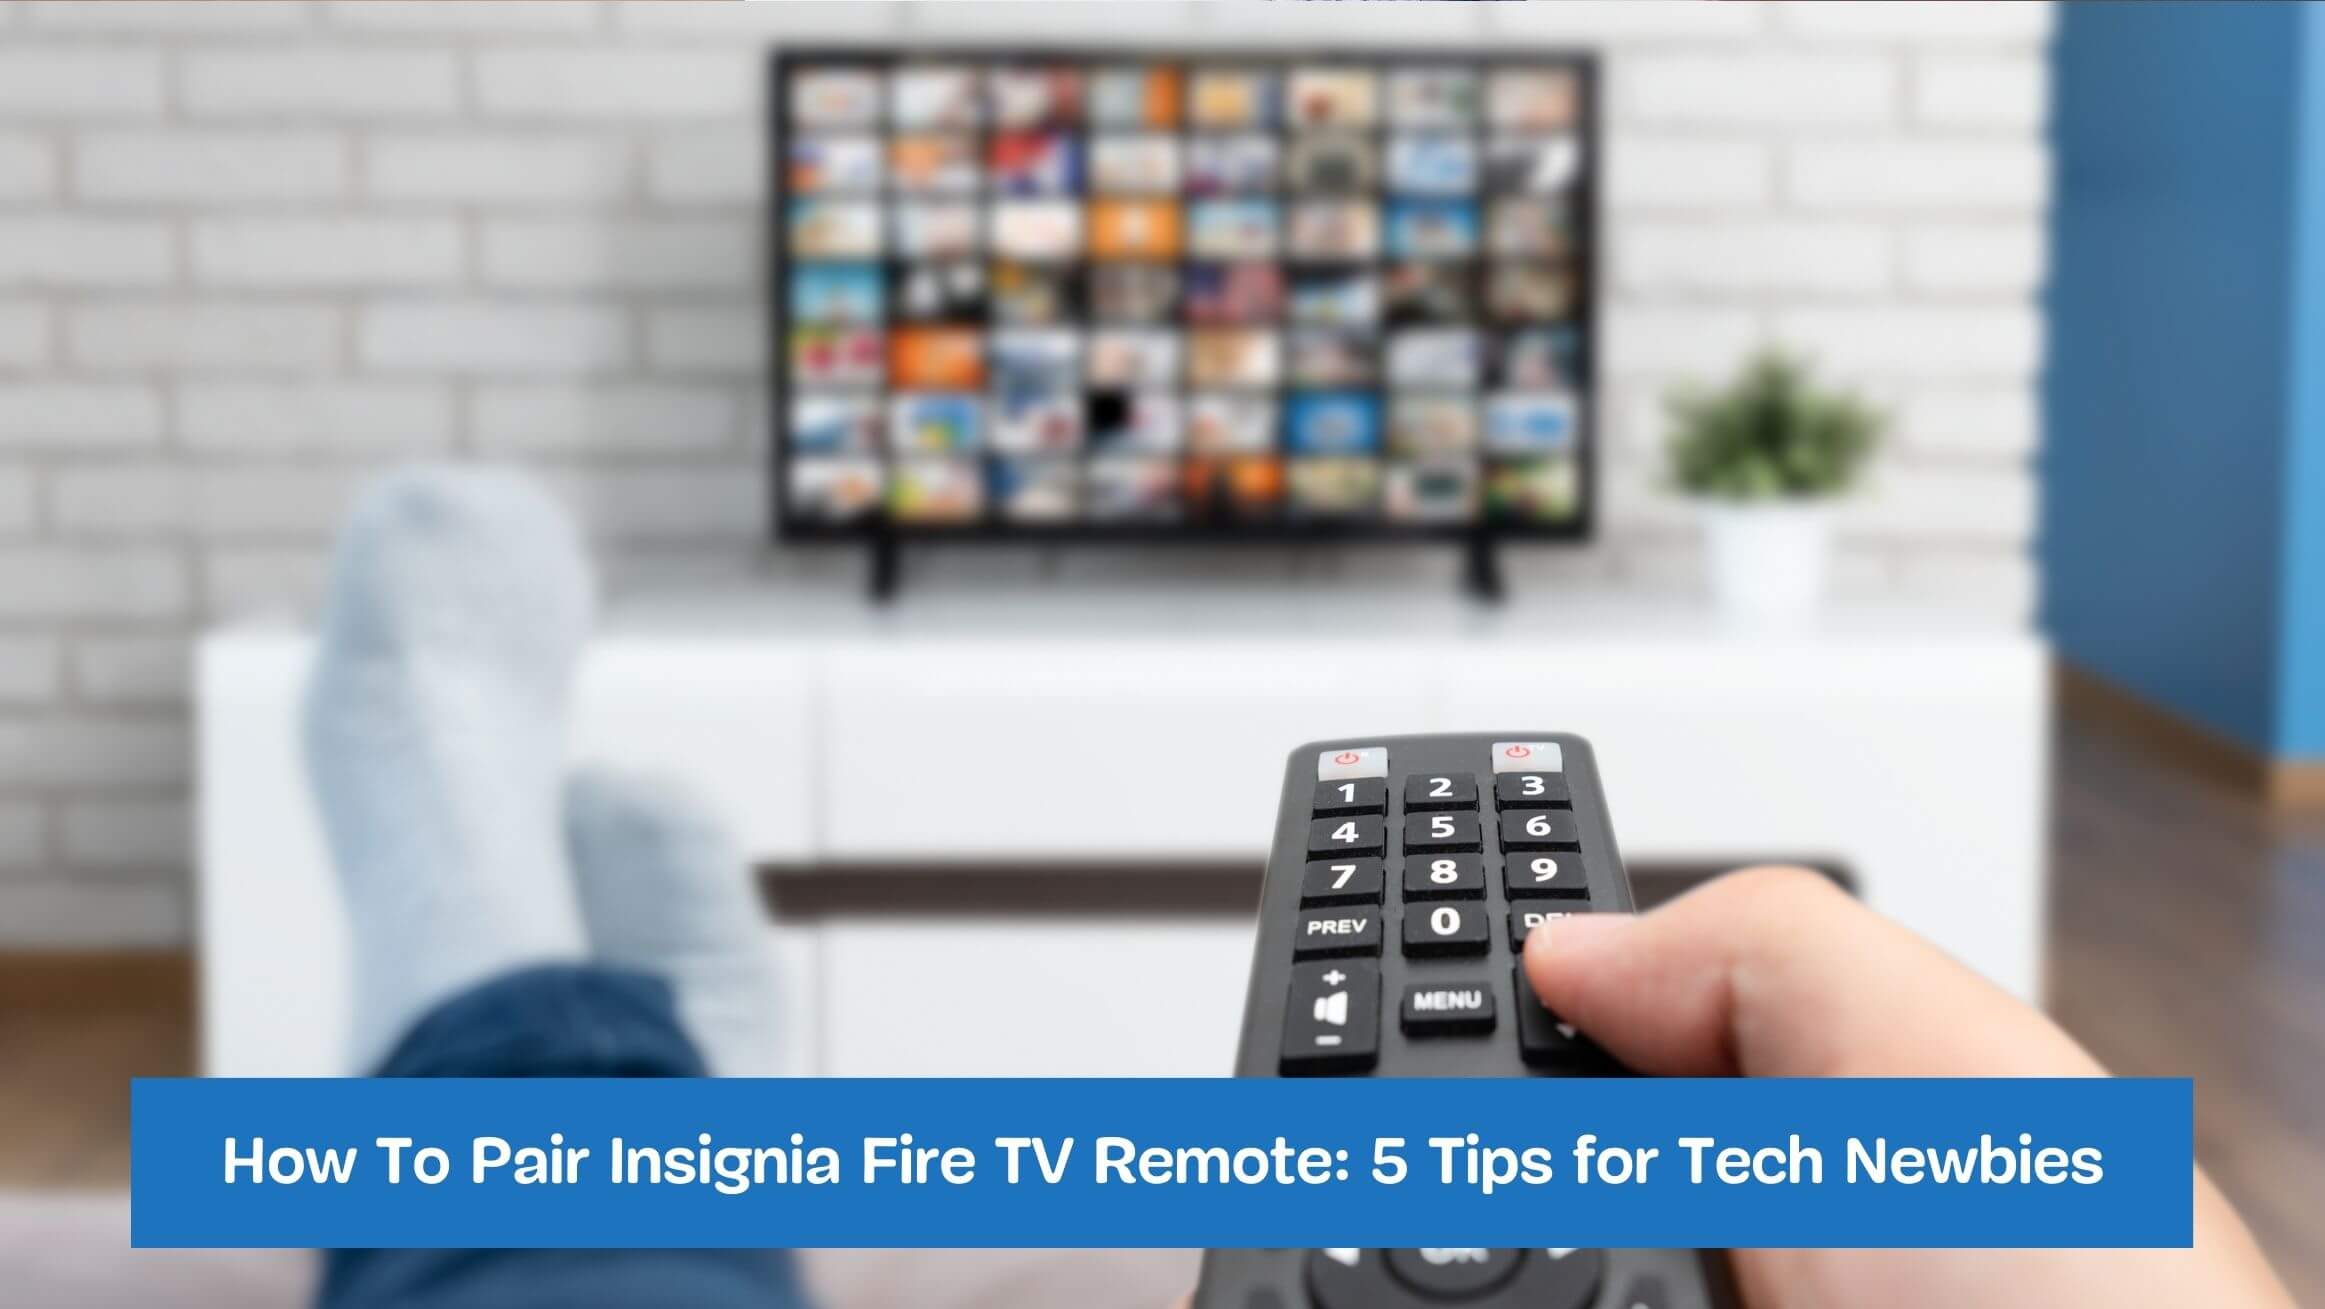 How To Pair Insignia Fire TV Remote: 5 Tips for Tech Newbies